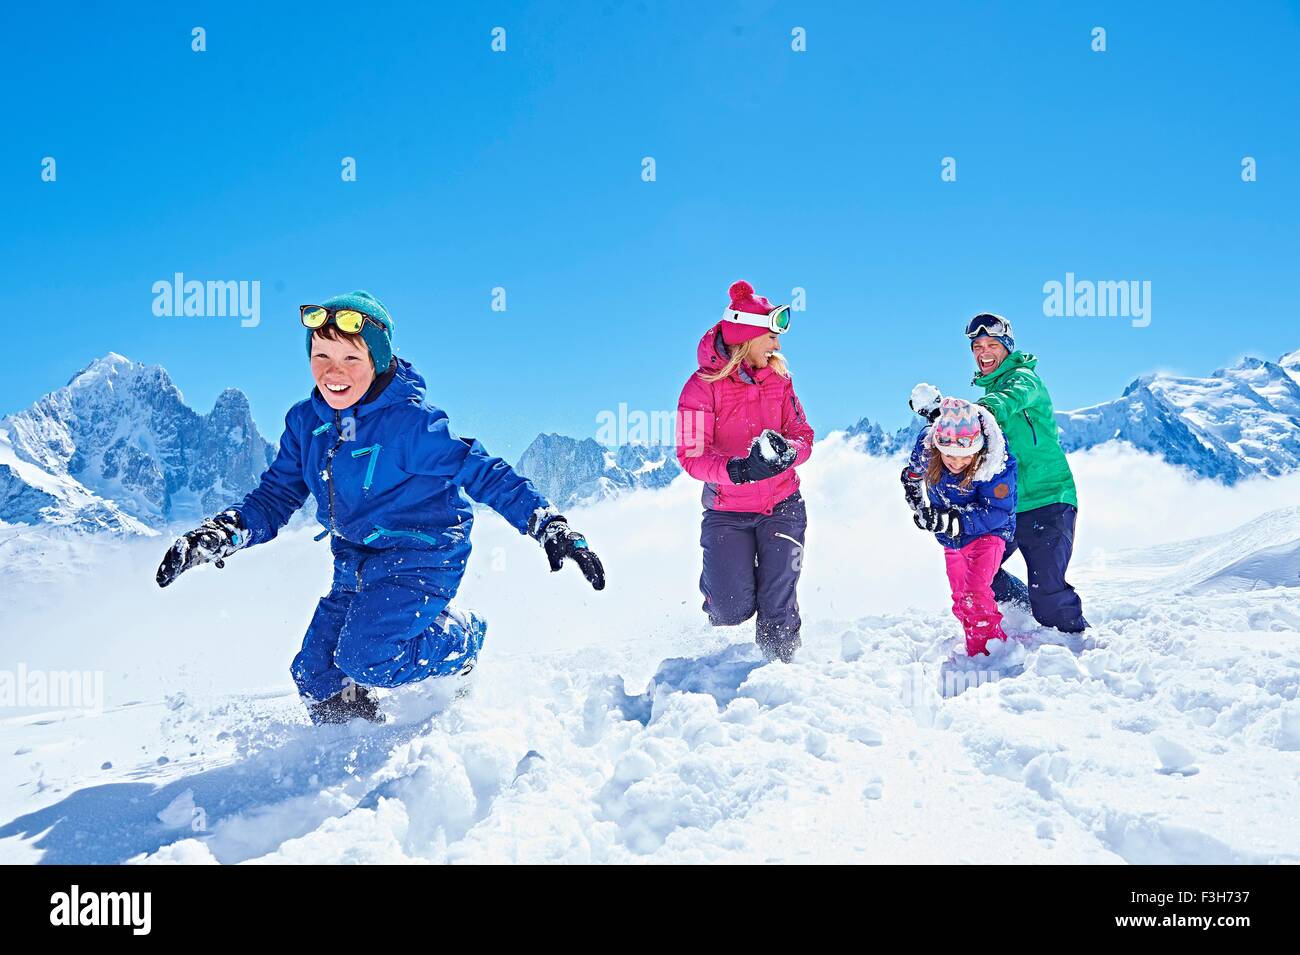 Family having snowball fight, Chamonix, France Banque D'Images